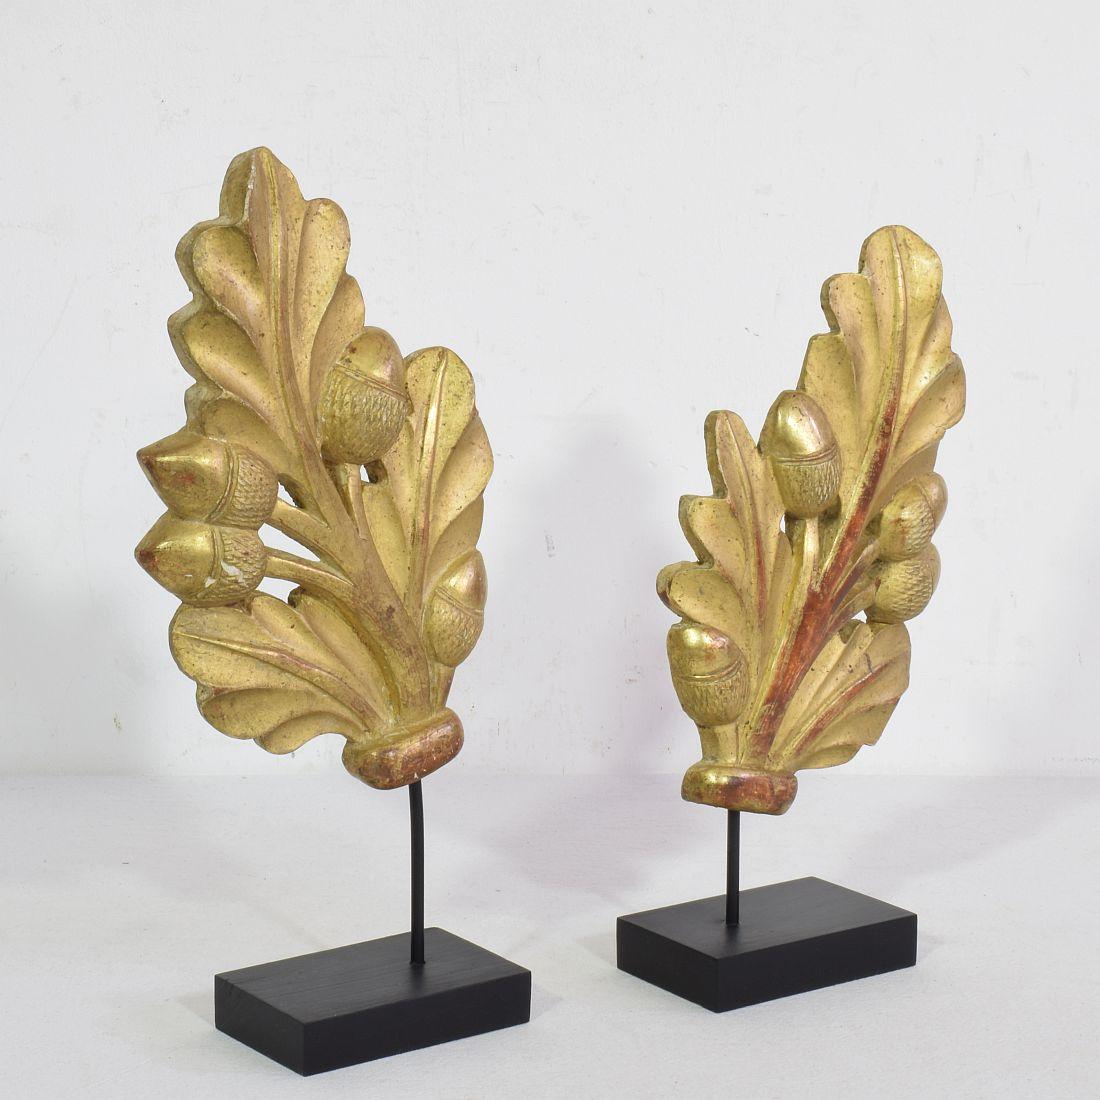 Hand-Carved Pair of 19th Century French Carved Giltwood Ornaments